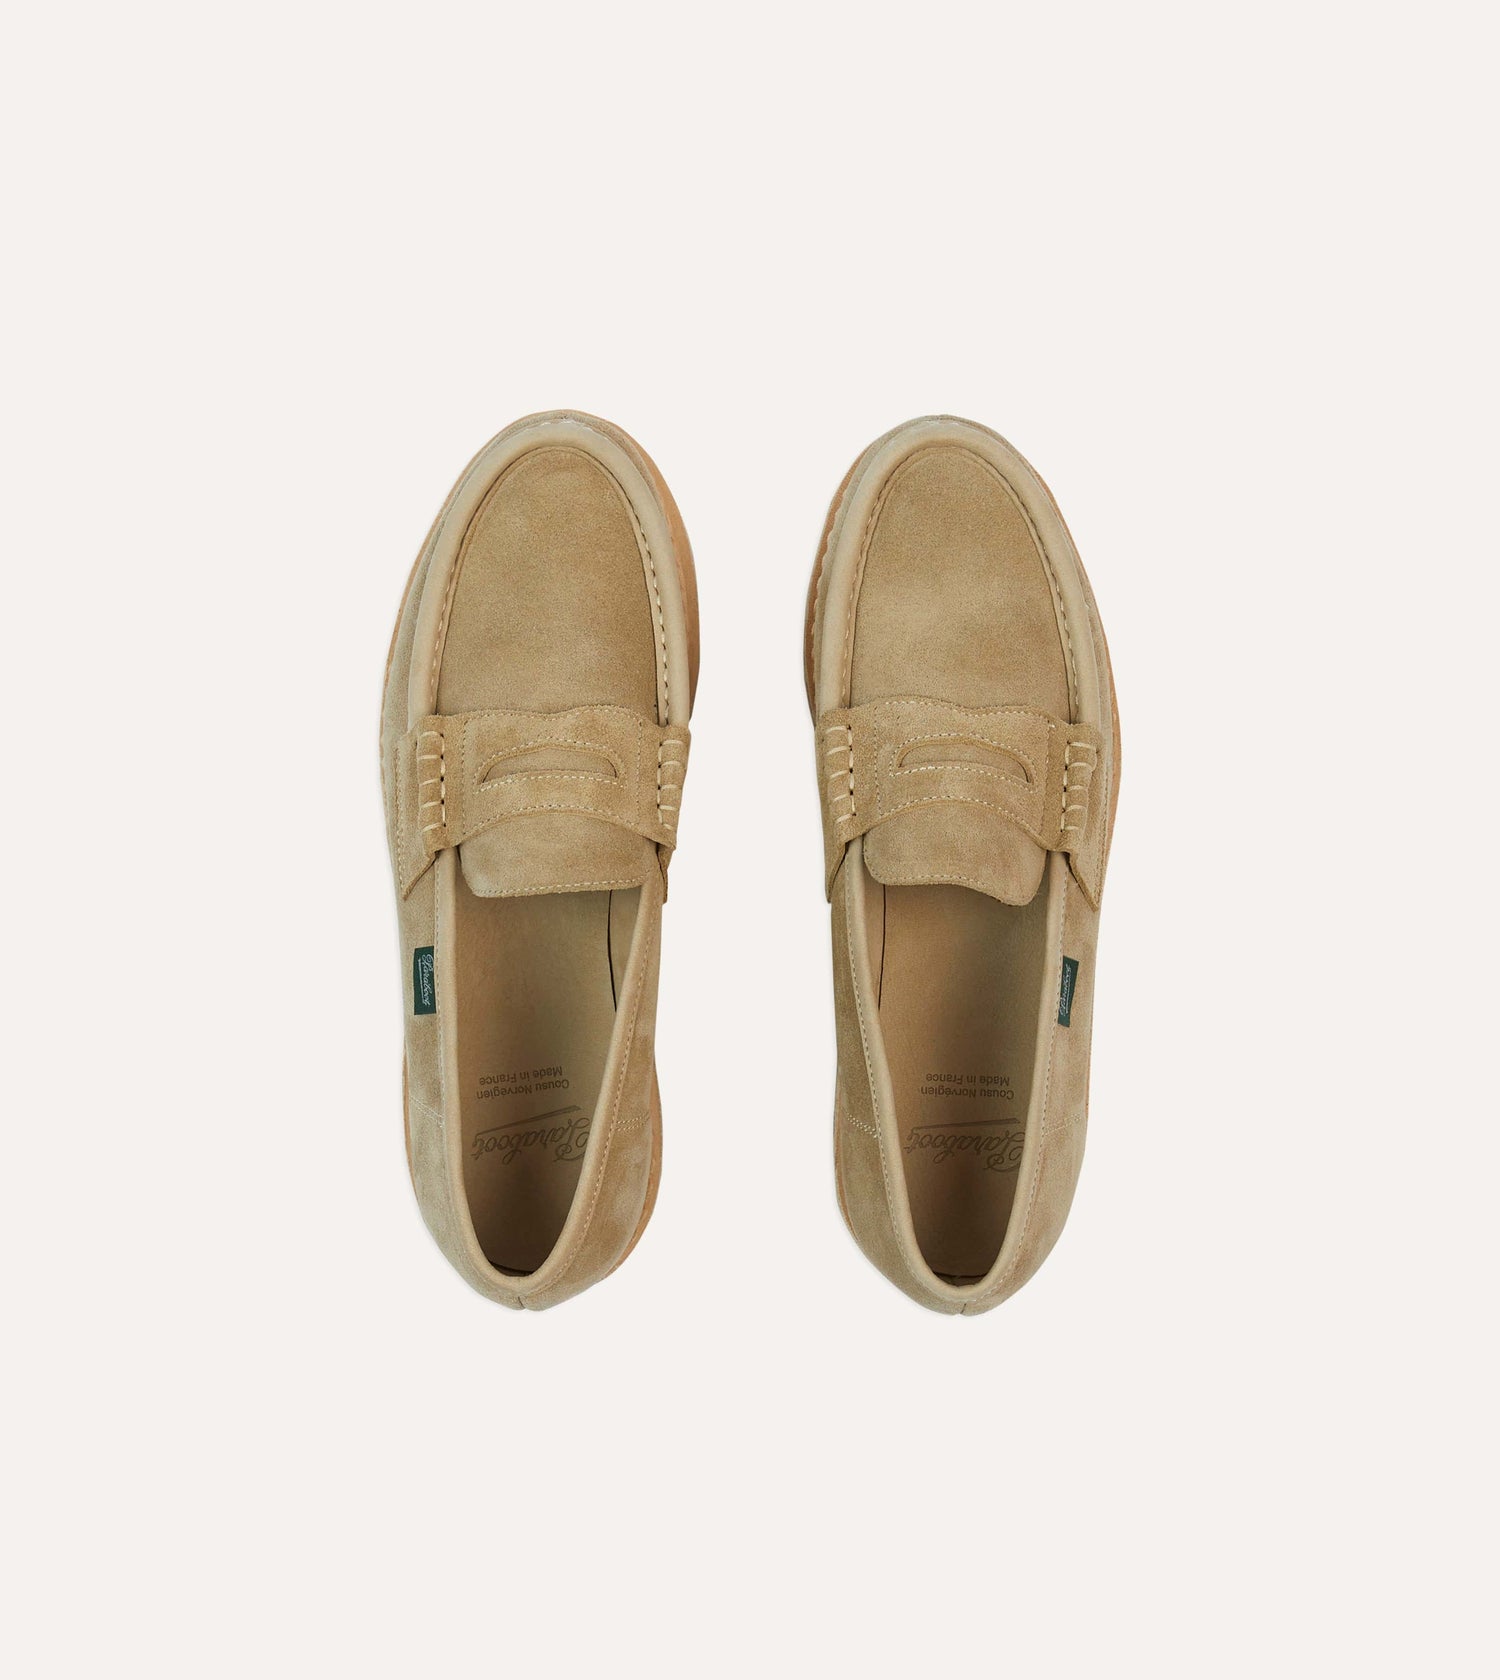 Paraboot Nantes Sand Suede Loafer